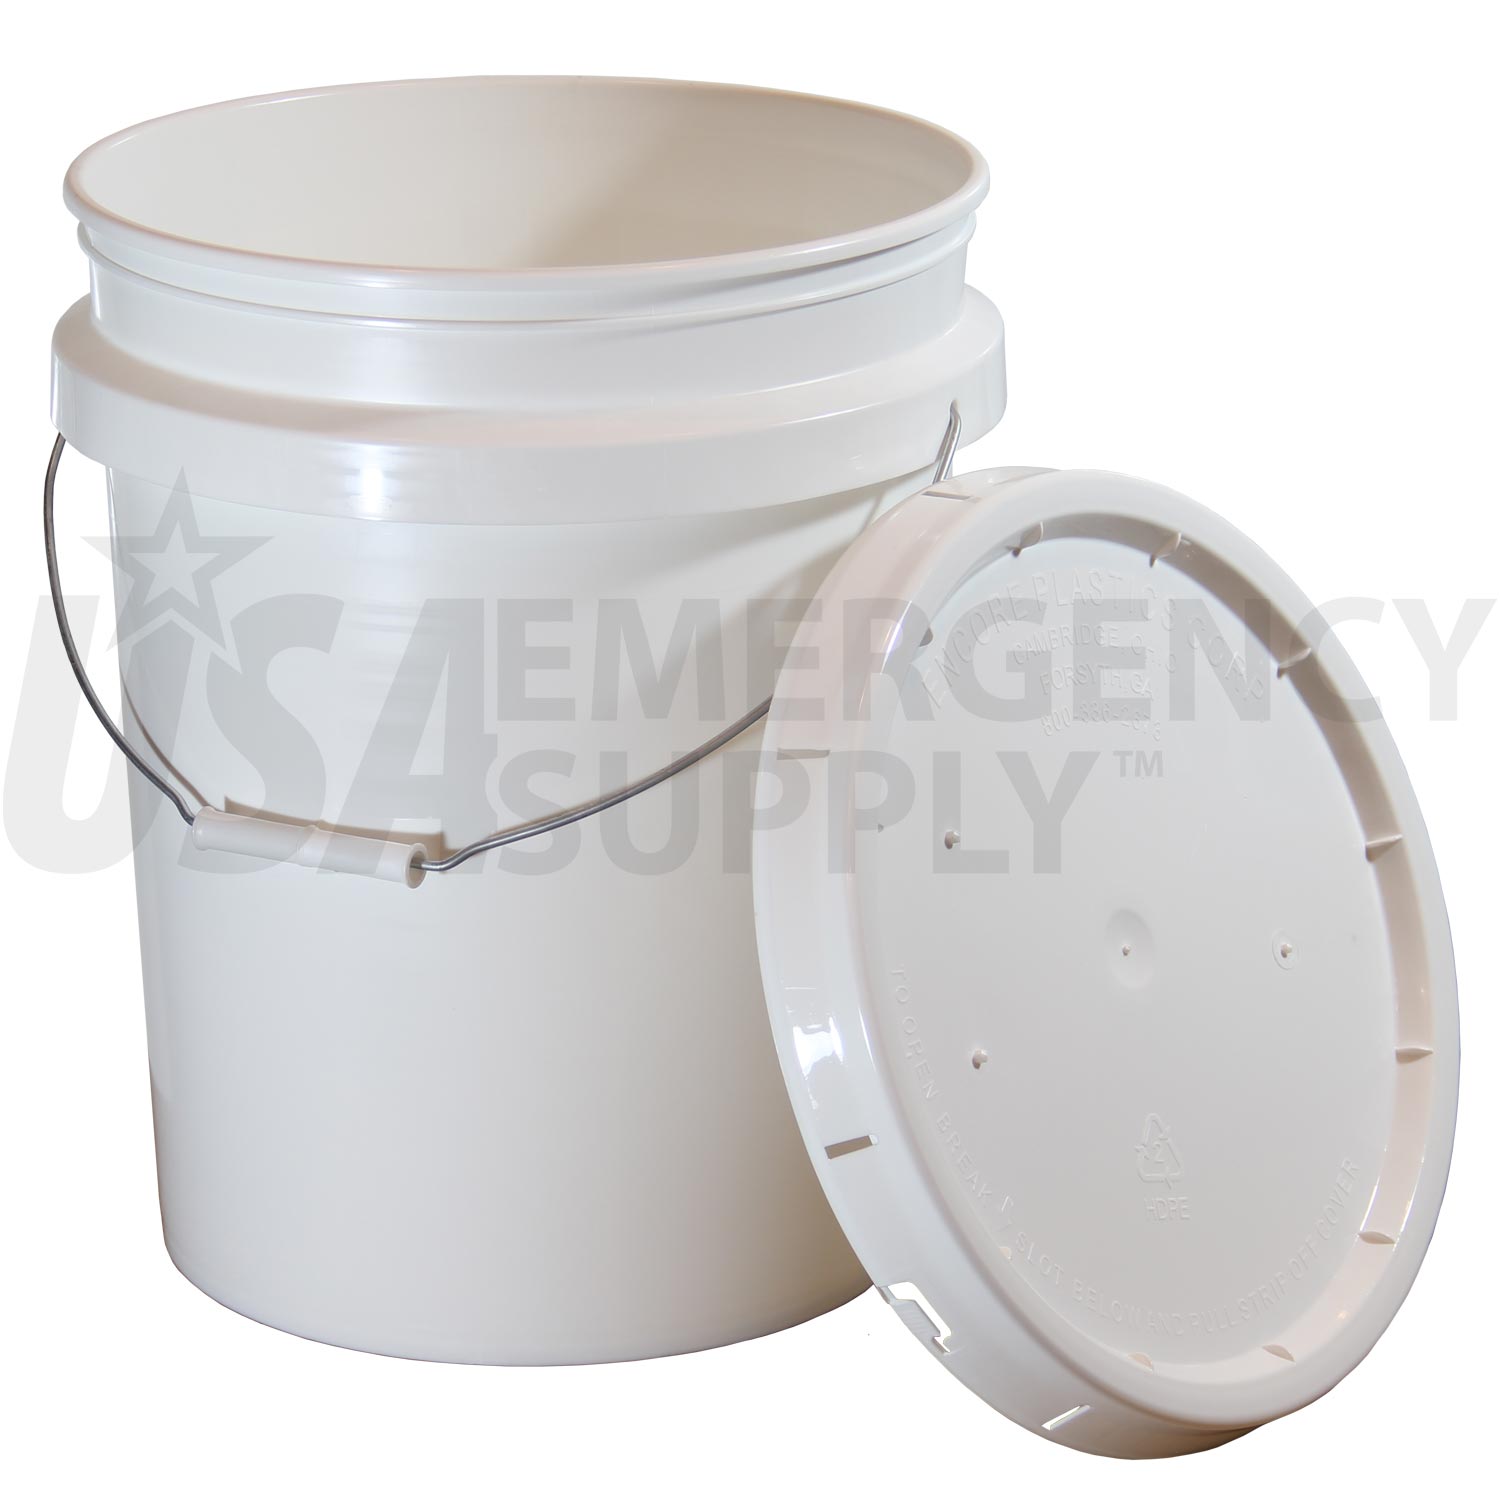 5 gallon buckets with lids for sale